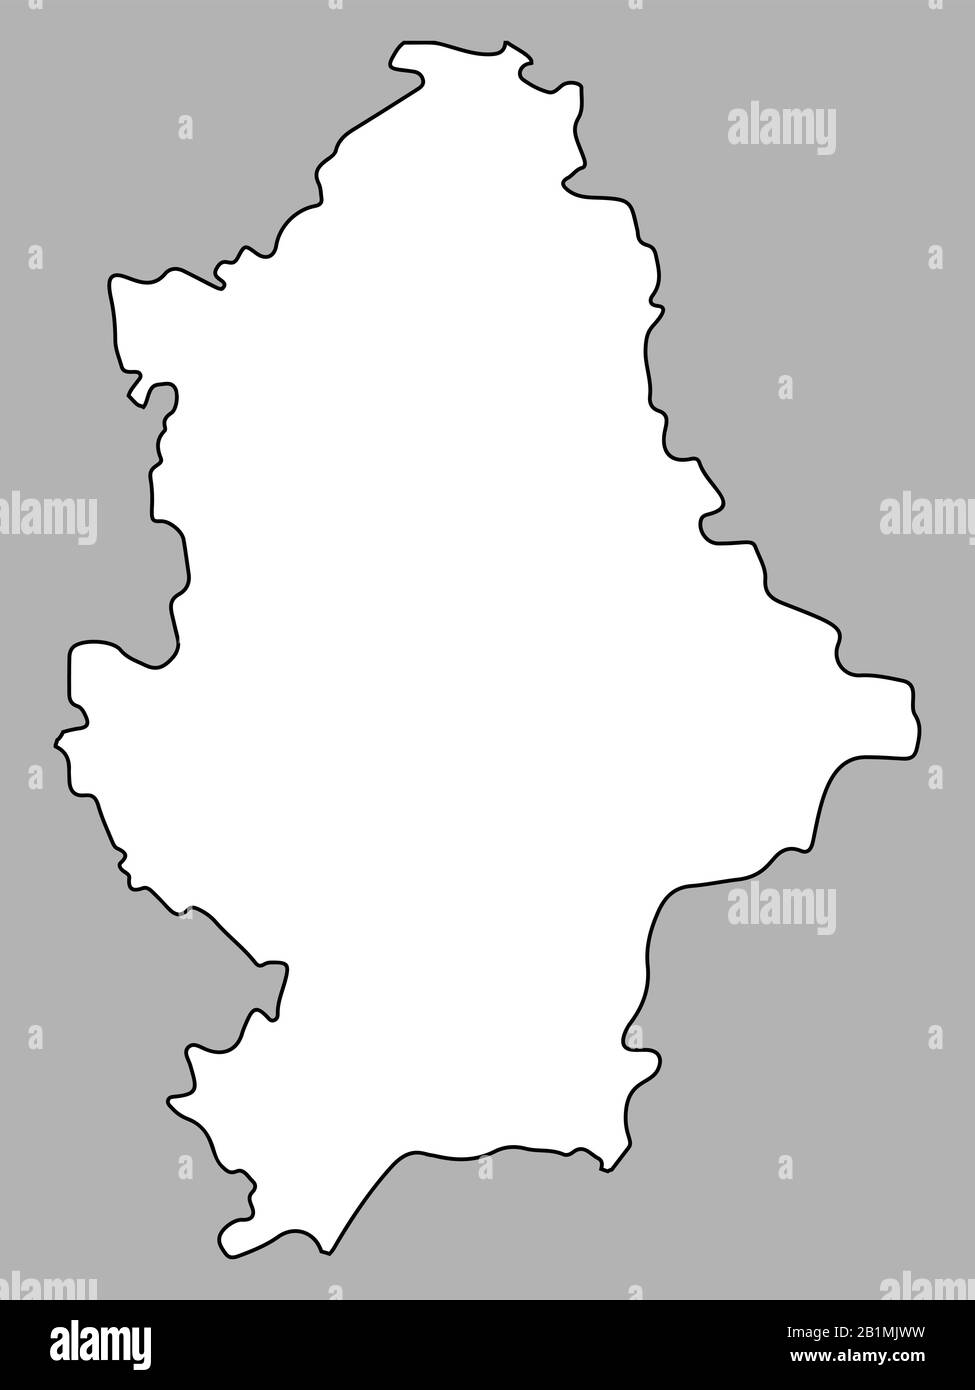 Donetsk Peoples Republic Map black outline vector Stock Vector